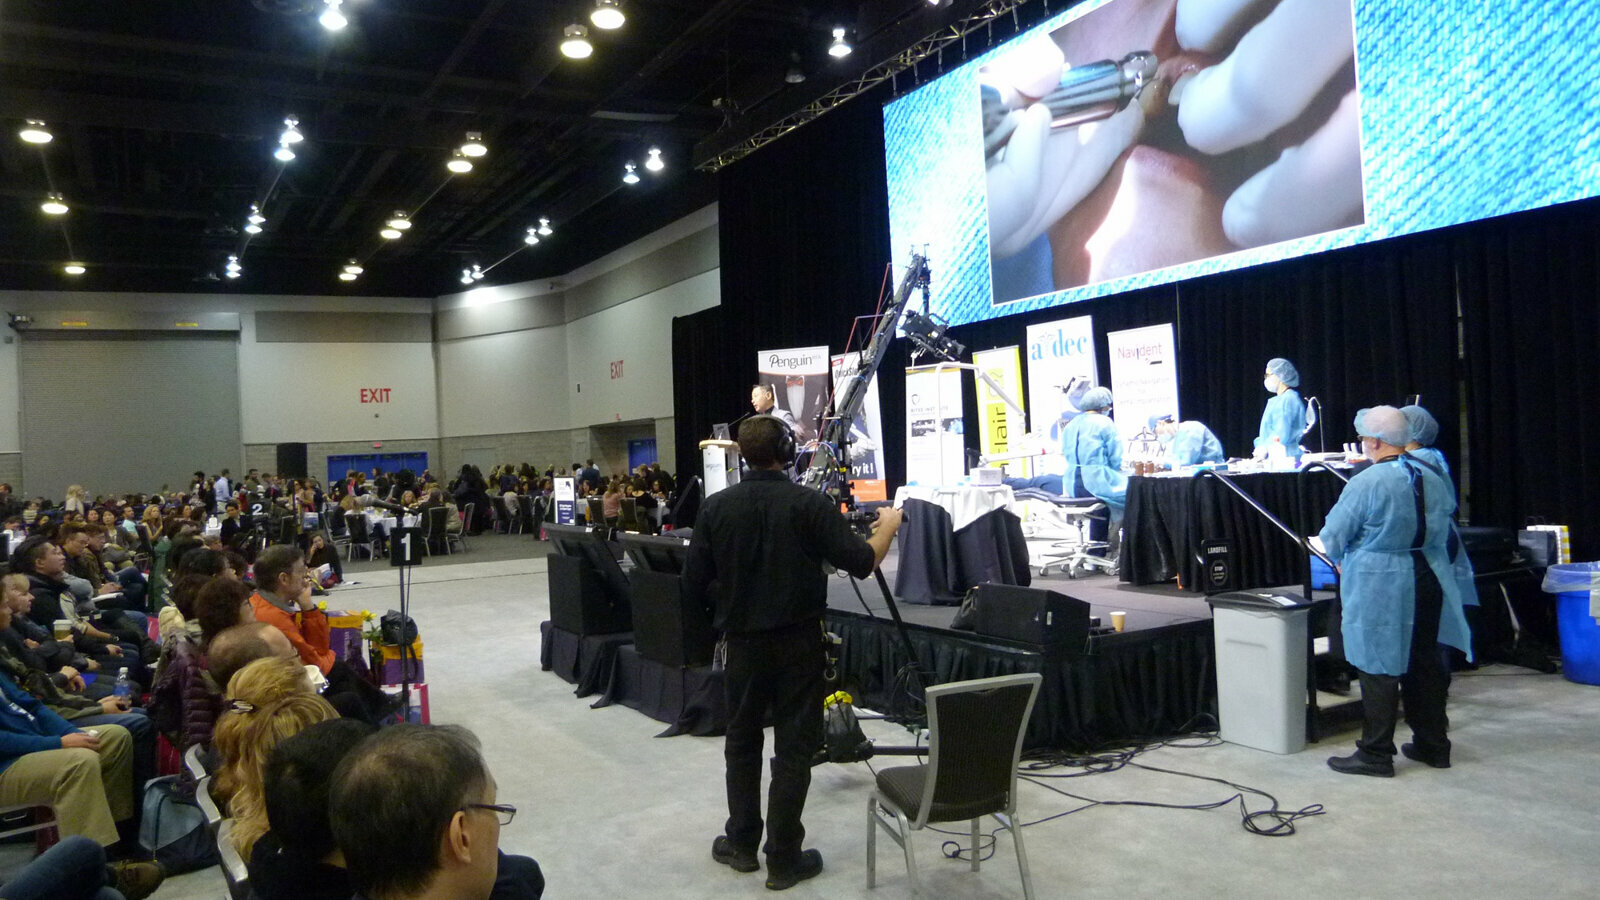 Pacific Dental Congress offers live dentistry in Exhibit Hall